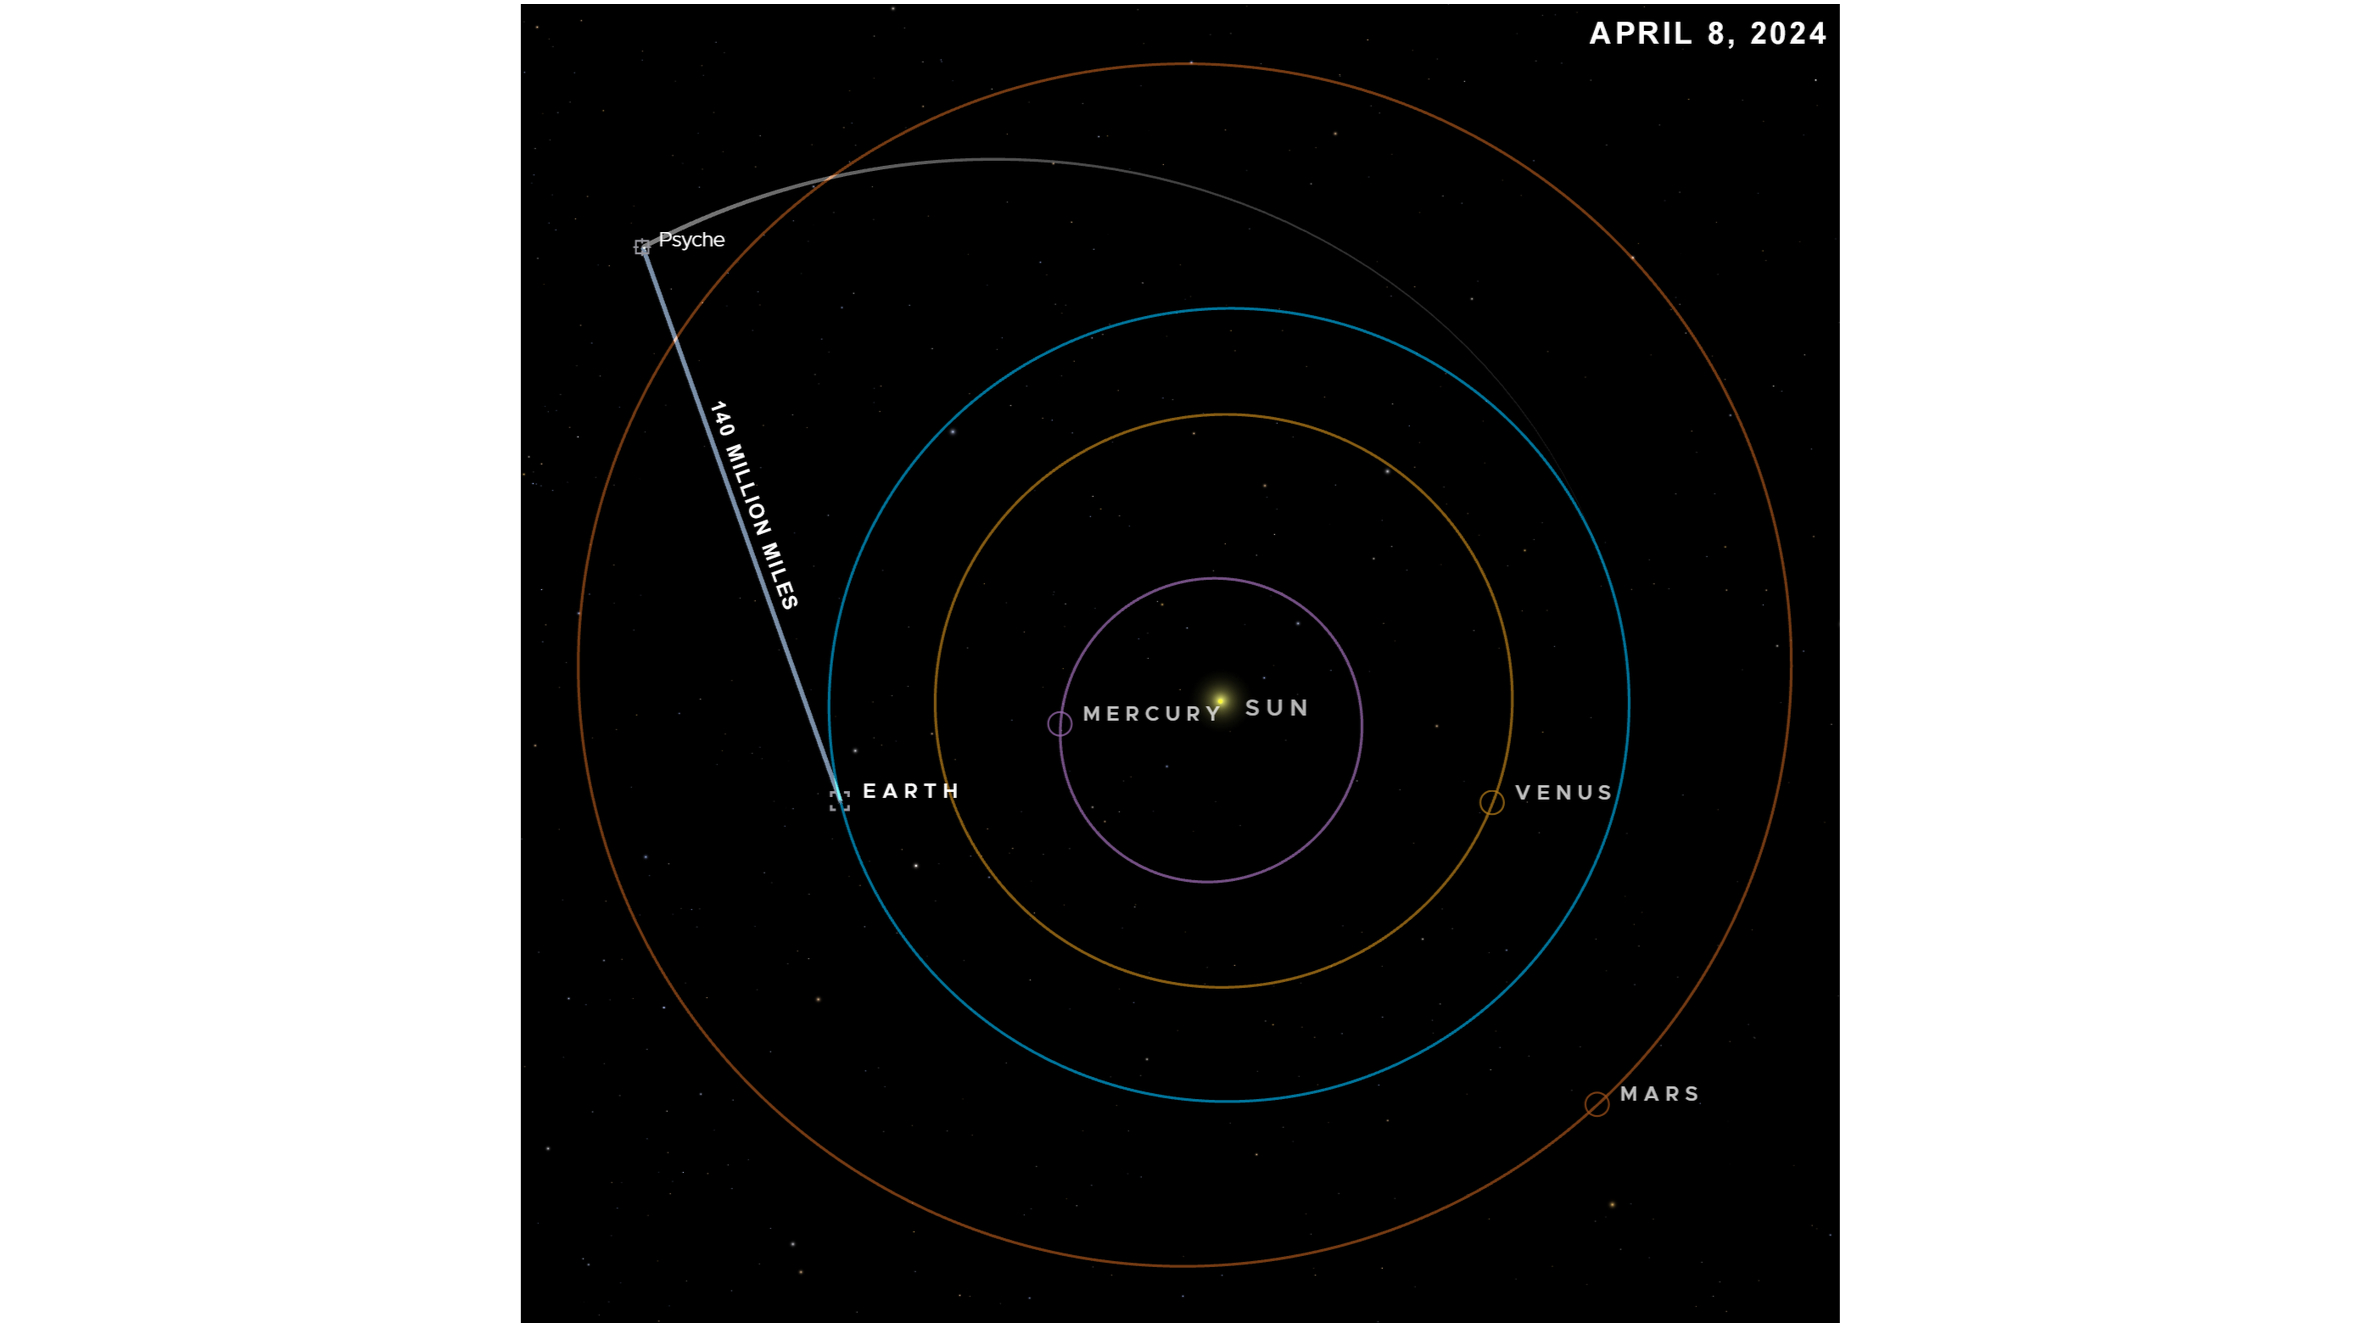 This visualization shows the Psyche spacecraft’s position on April 8 when the DSOC flight laser transceiver transmitted data at a rate of 25 Mbps over 140 million miles to a downlink station on Earth.